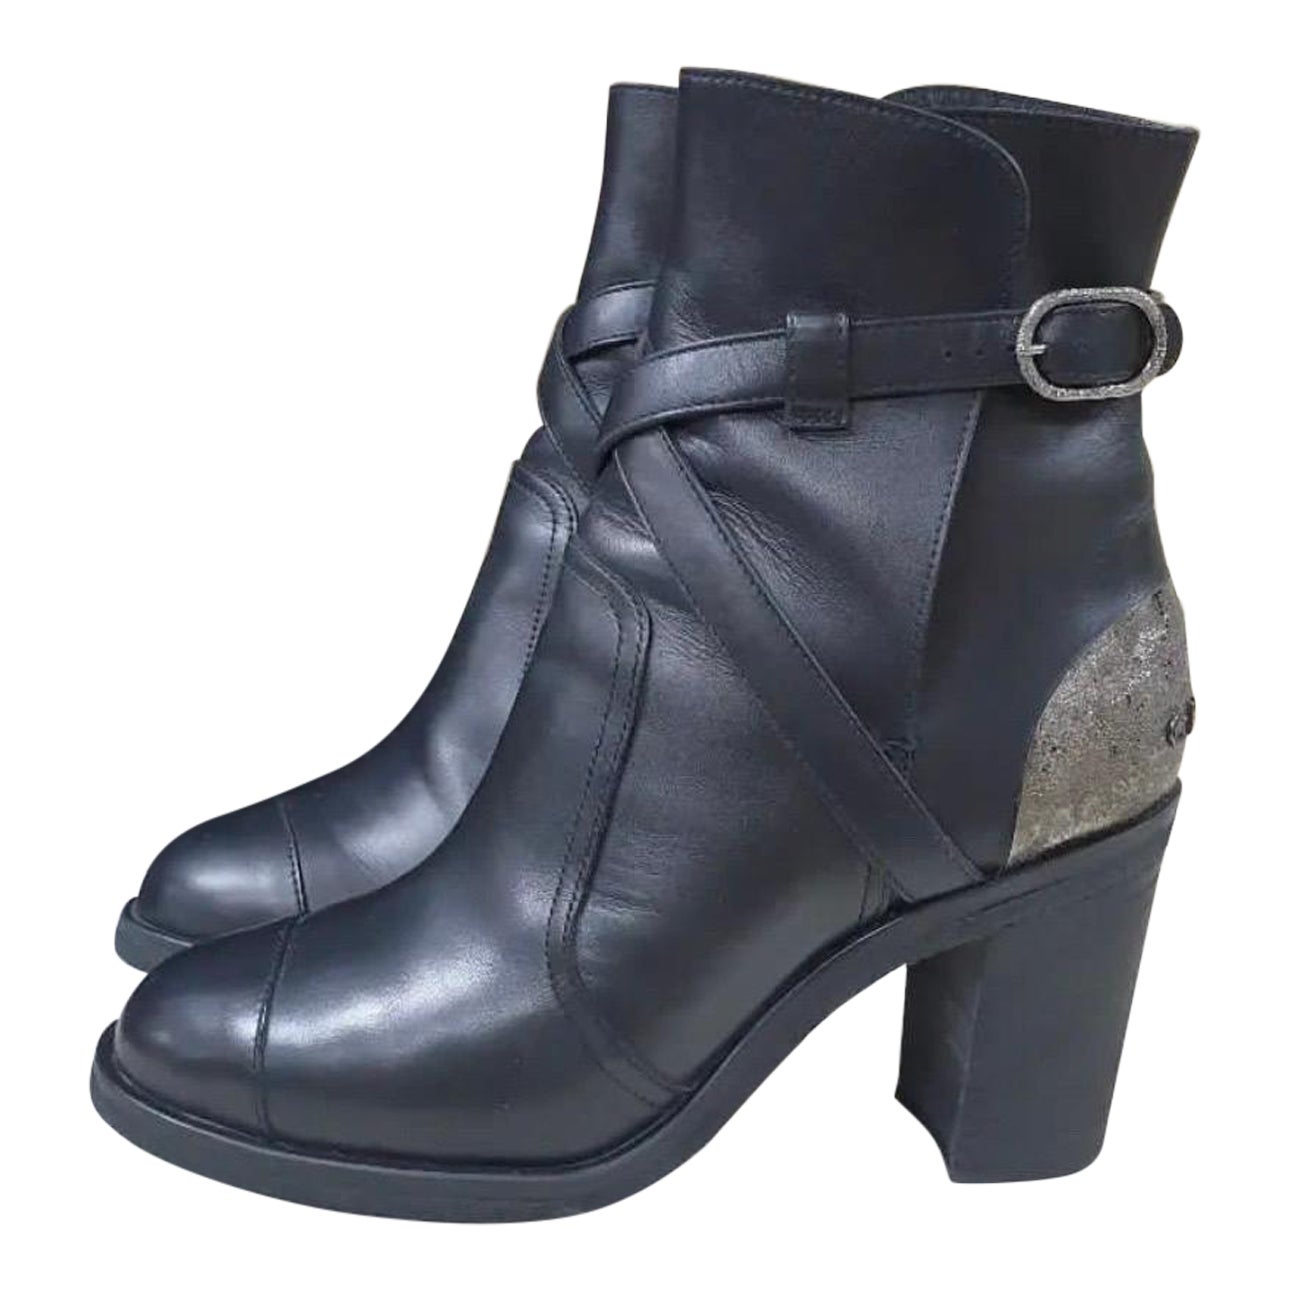 Chanel Black Leather Ankle Boots